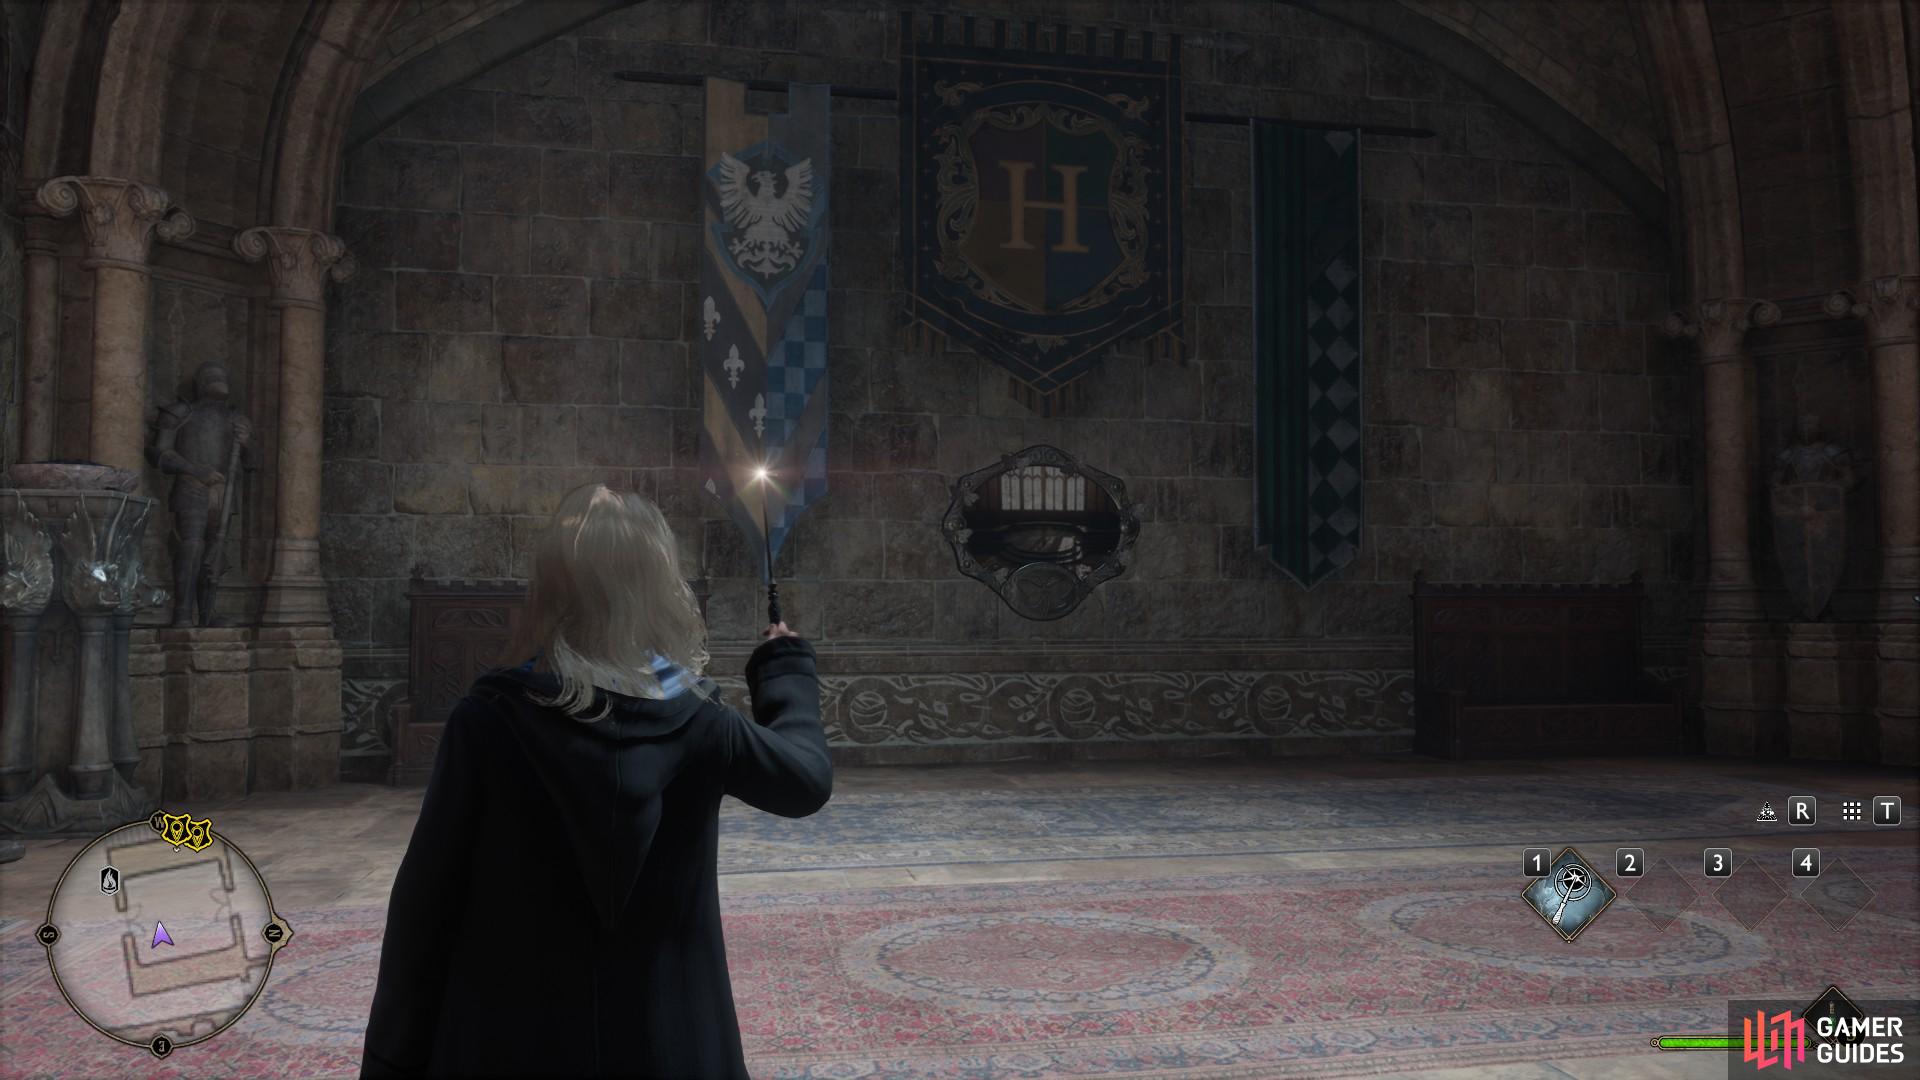 Head into the Great Hall, then look for a Moth Mirror on the right.